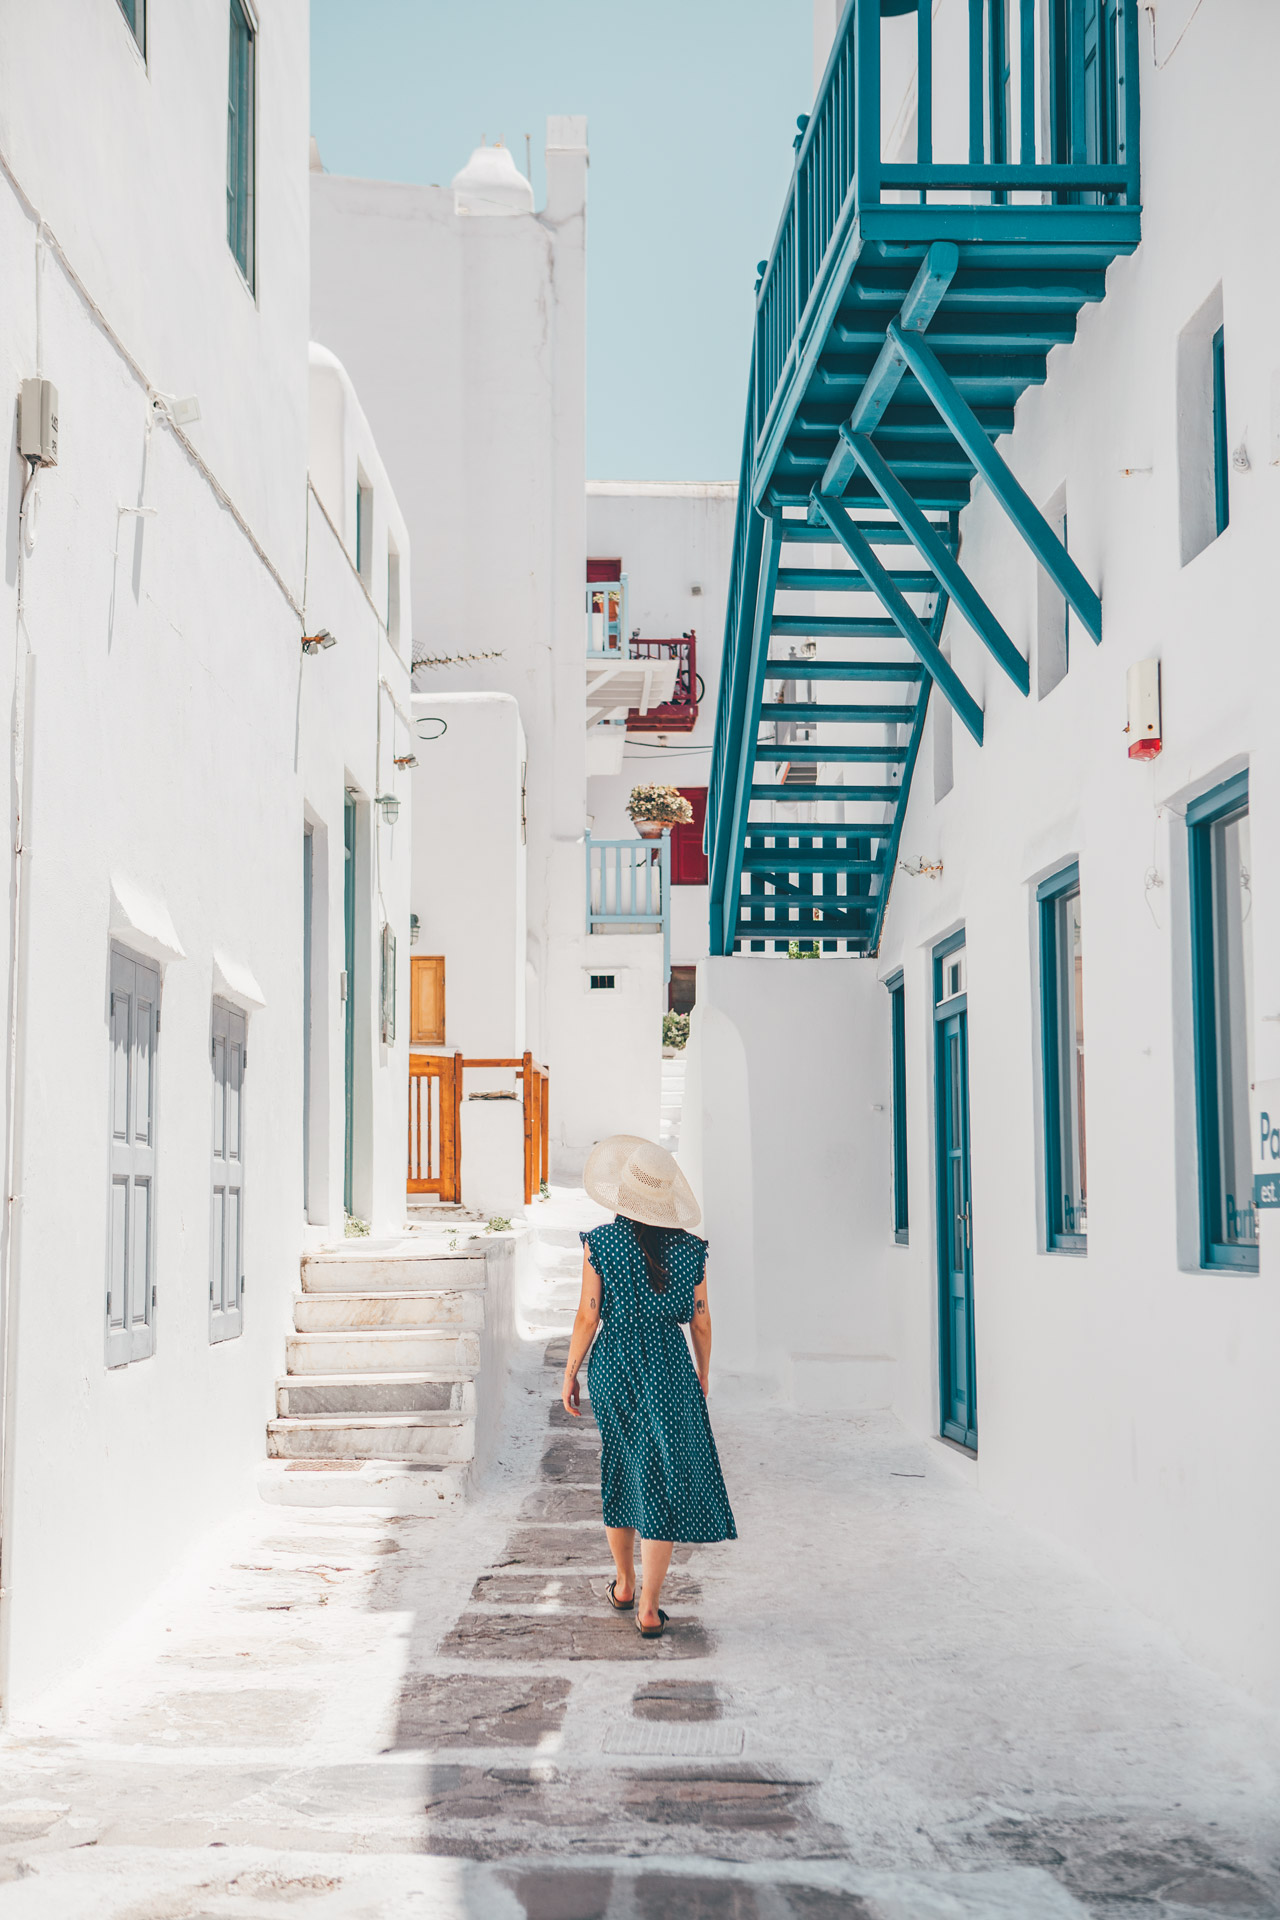 Hora of Mykonos during early summer months